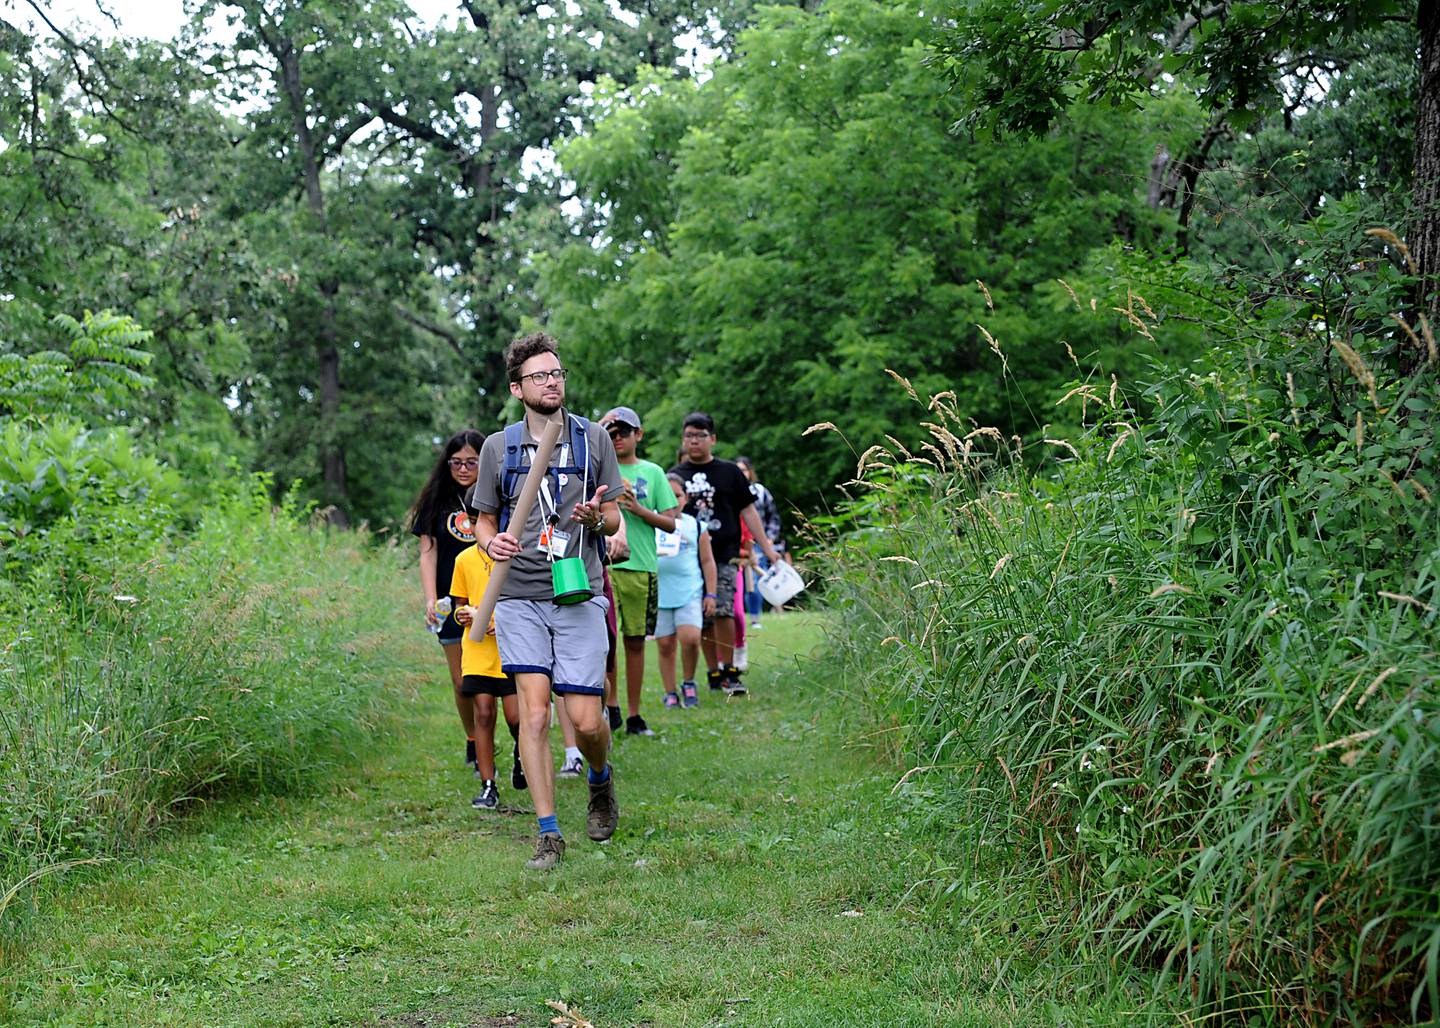 Nate Szkil, an education program coordinator with McHenry County Conservation District, leads children from Youth and Family Center of McHenry County’s summer camp program on a rhythm in nature hike during a field trip to the Harrison Benwell Conservation Area, 7055 McCullom Lake Road in Wonder Lake. The Youth and Family Center of McHenry County is hiring a social worker to assist with the mental health needs of those they help. The nonprofit is one of three receiving funds through United Way of Greater McHenry County as part of an Advance McHenry County grant.